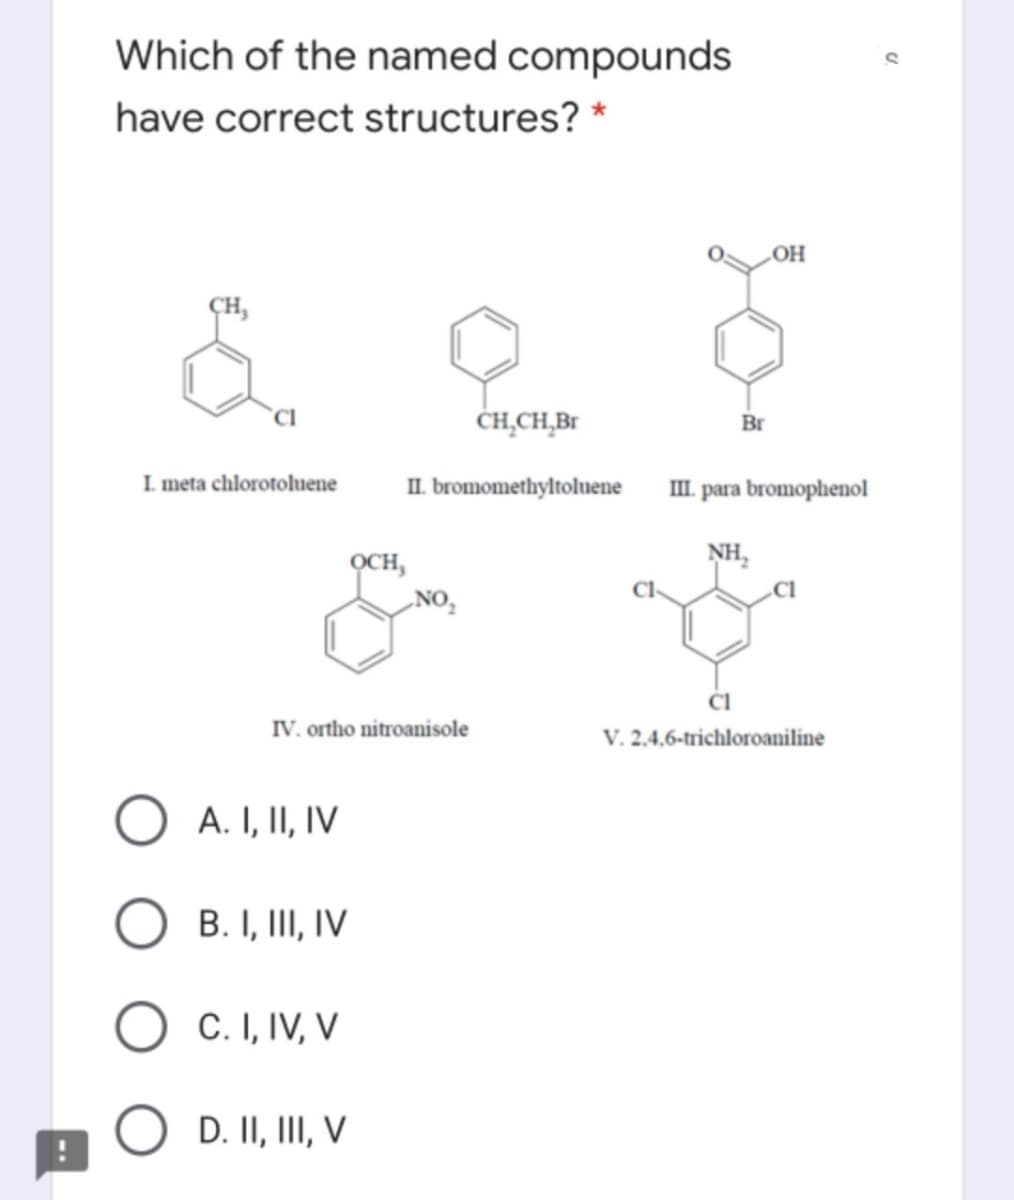 Which of the named compounds
have correct structures? *
„OH
CH,
ČH̟CH̟B1
Br
I meta chlorotoluene
II. bromomethyltoluene
III. para bromophenol
NH,
OCH,
„NO,
IV. ortho nitroanisole
V. 2,4,6-trichloroaniline
A. I, II, IV
B. I, III, IV
C. I, IV, V
D. II, III, V
